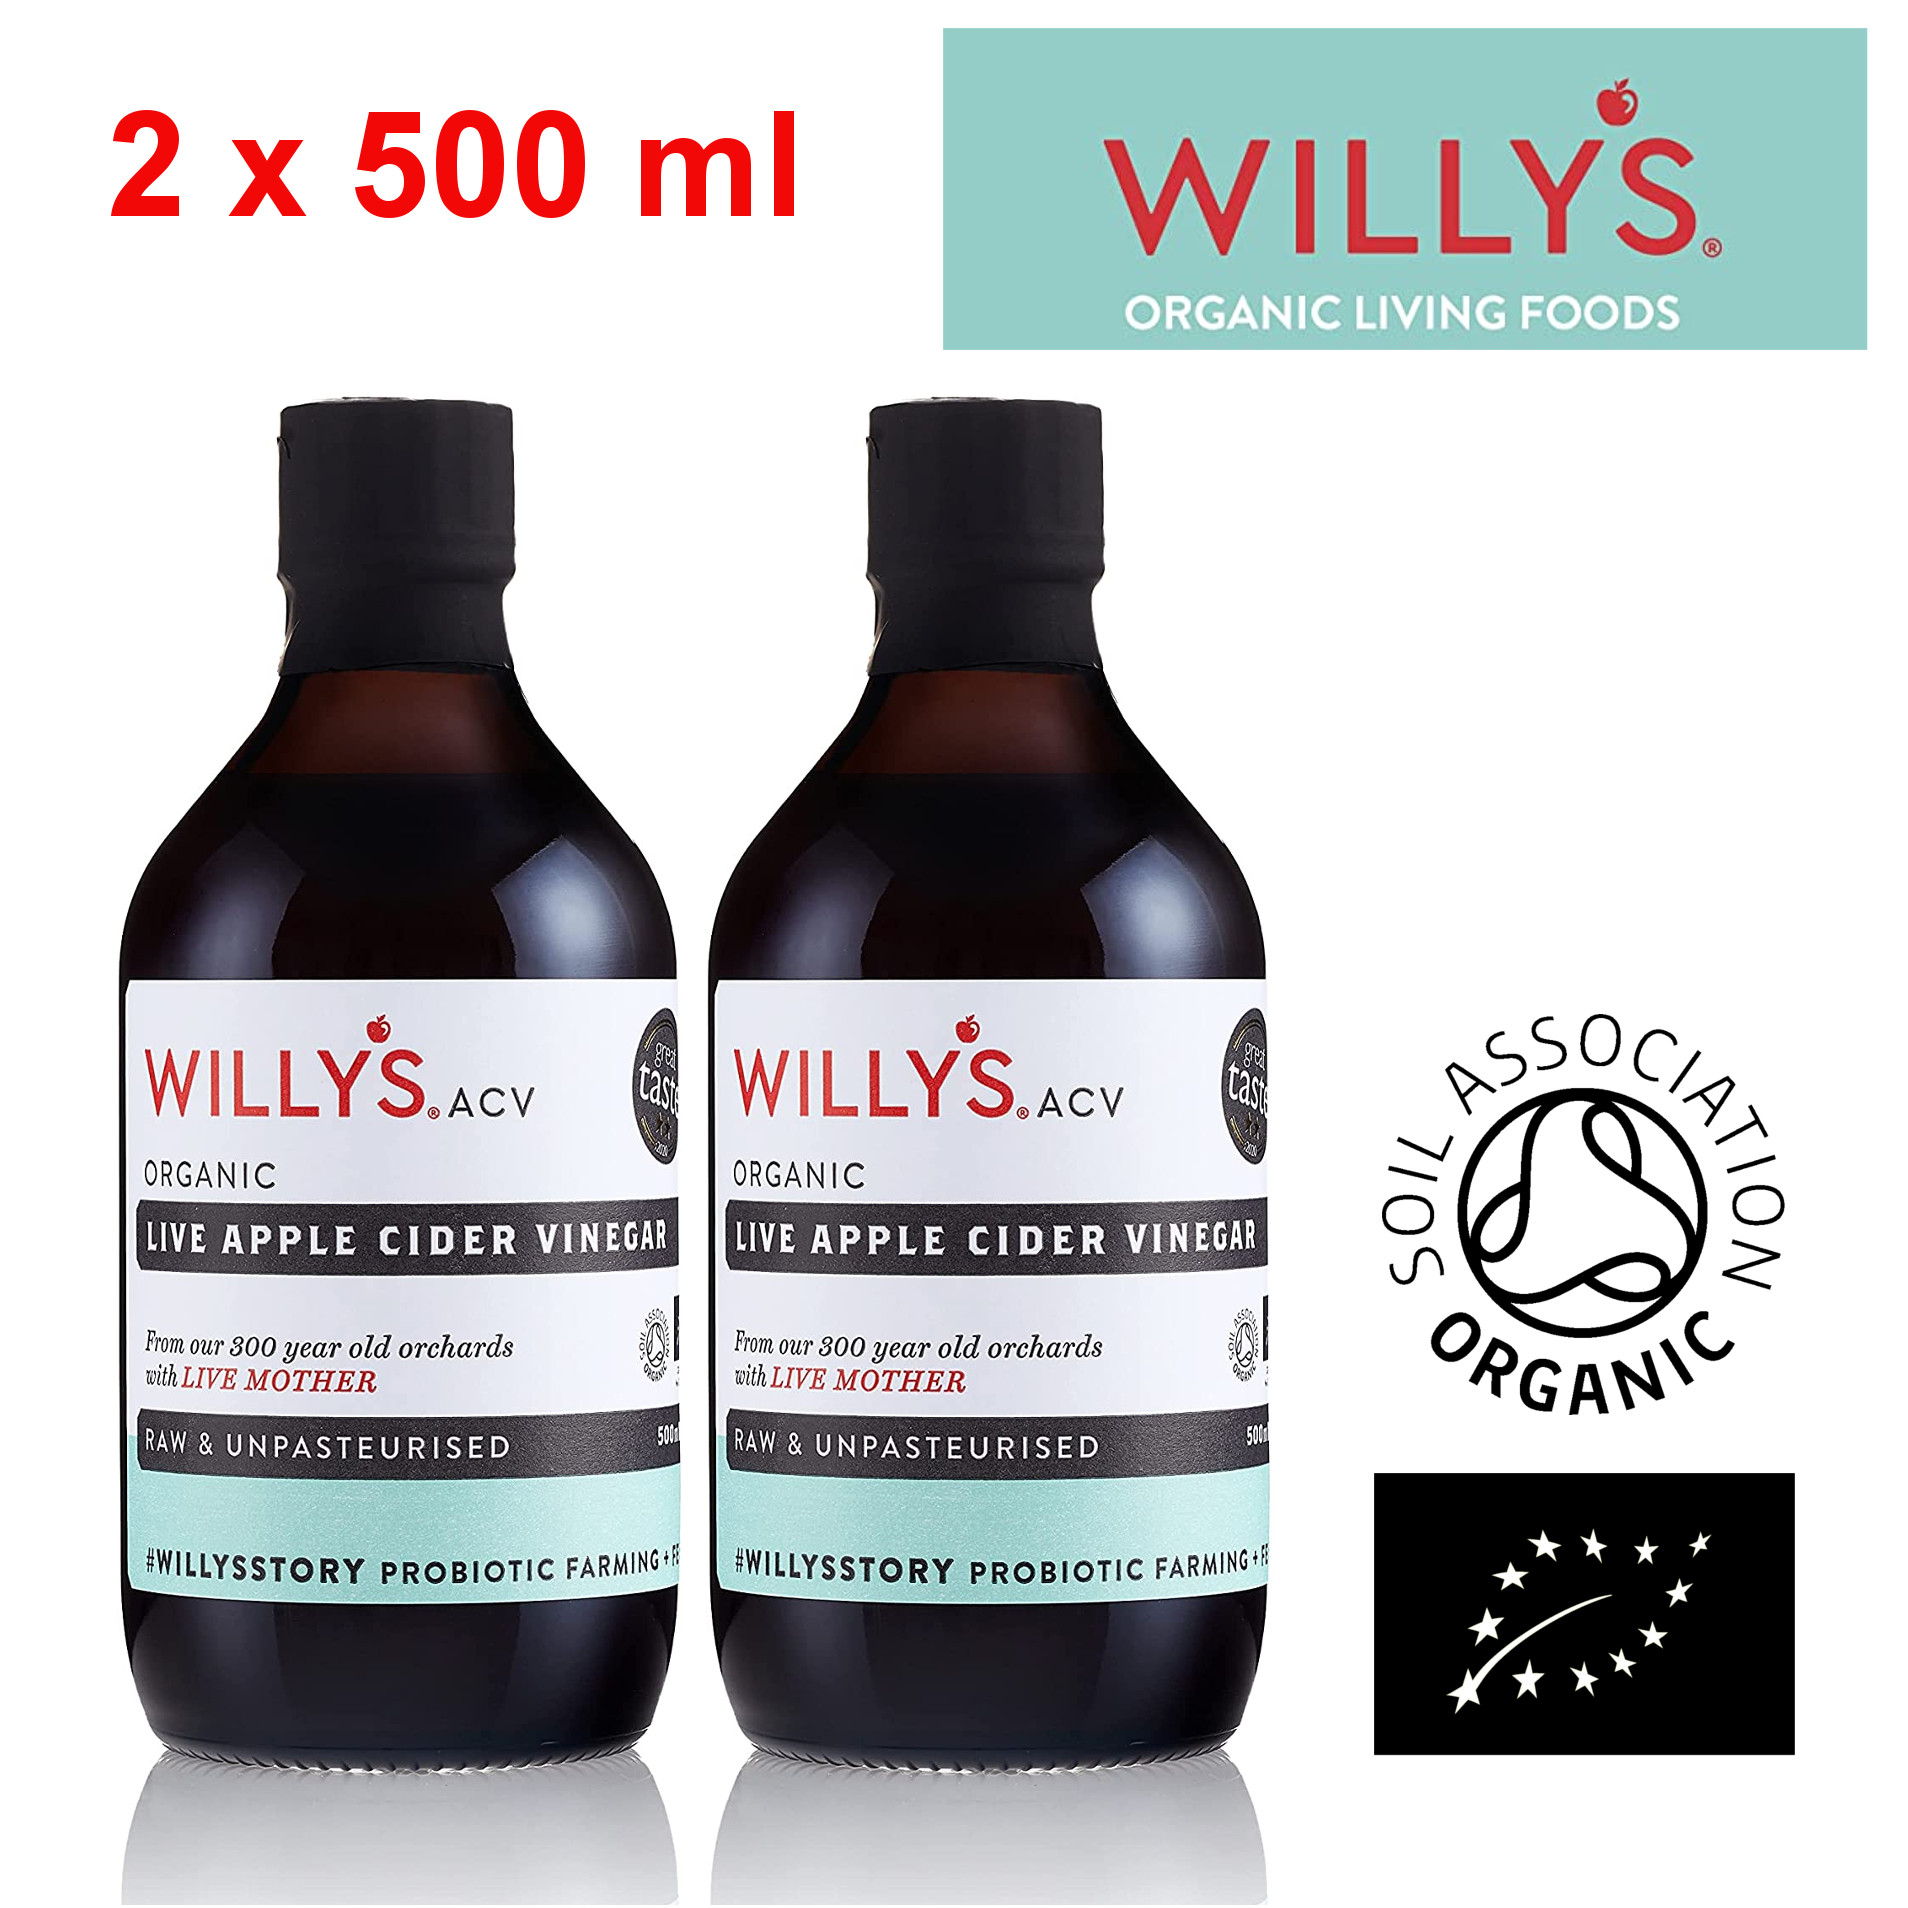 WILLY'S ORGANIC Raw Apple Cider Vinegar with Real Live Mother, 1L (2x 500 ml)